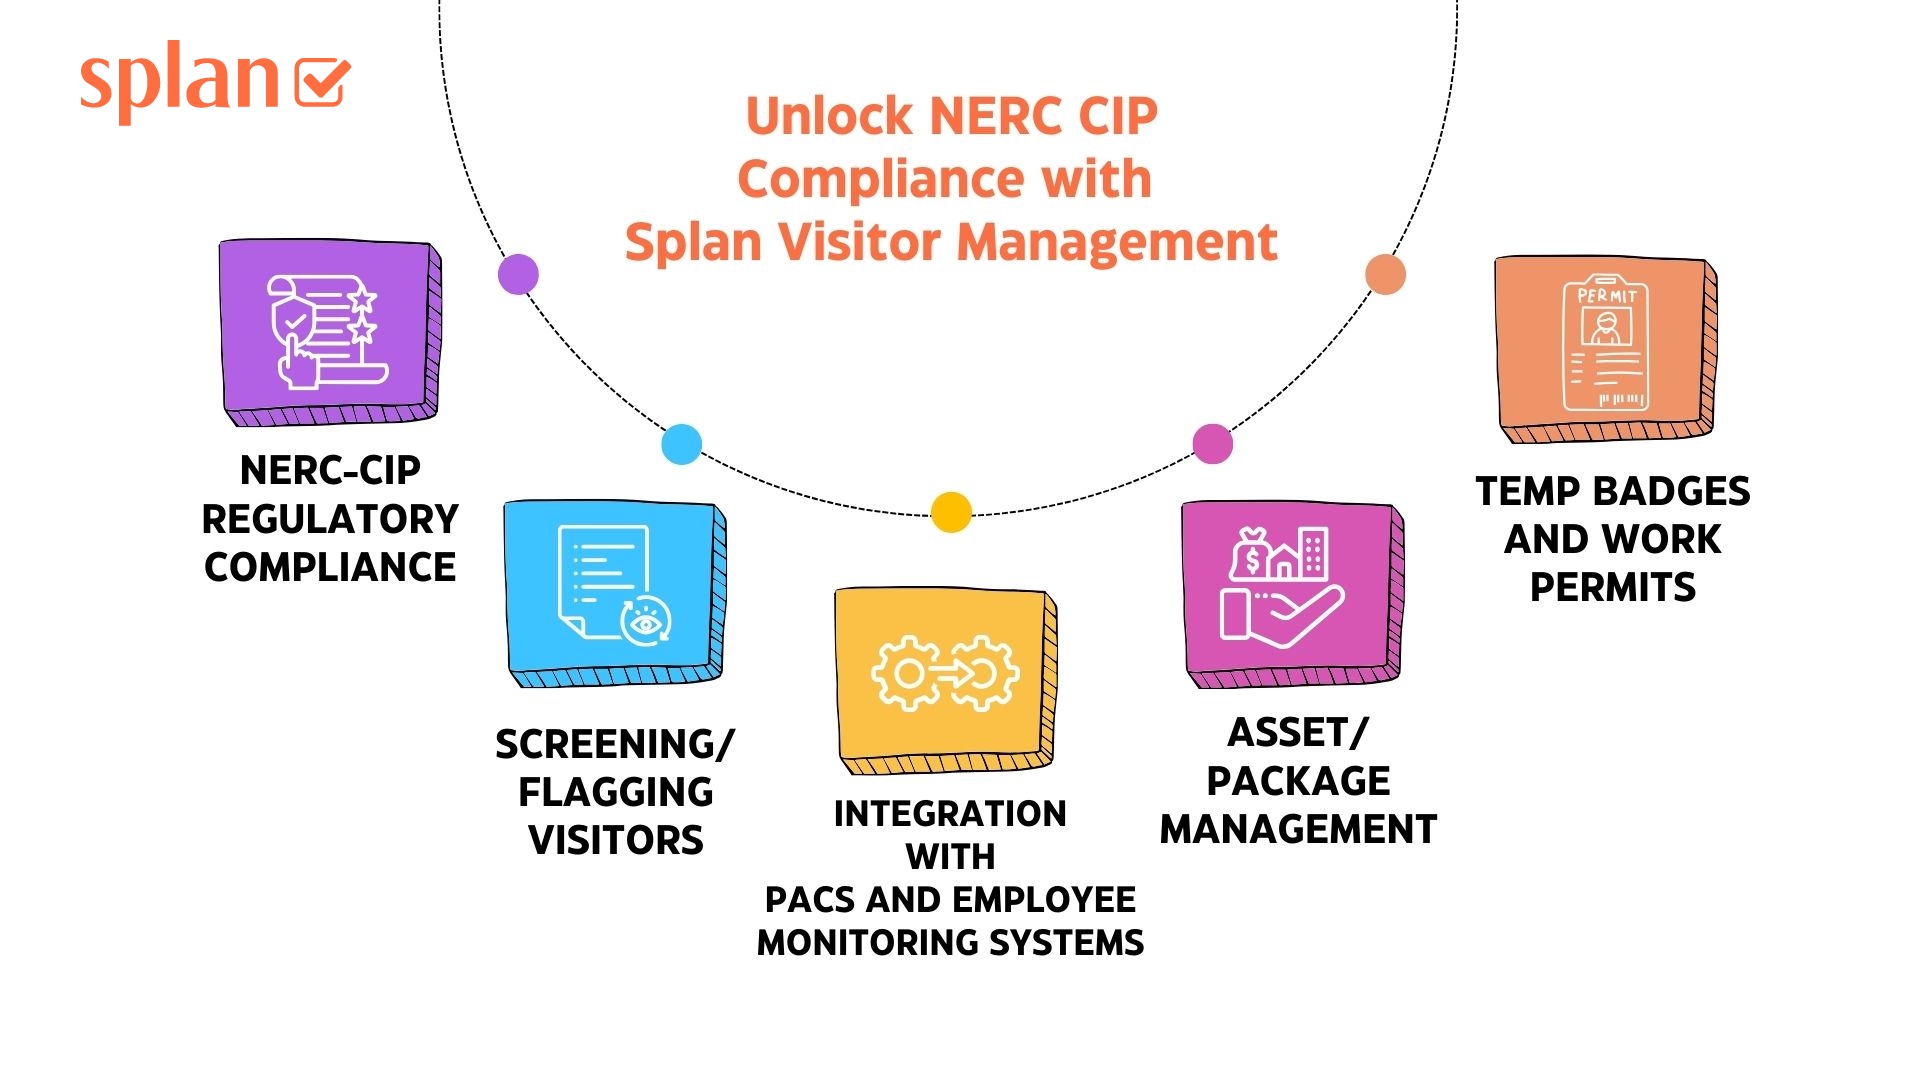 Reinforcing NERC CIP Compliance through Splan Visitor Management - How it can help Utilities